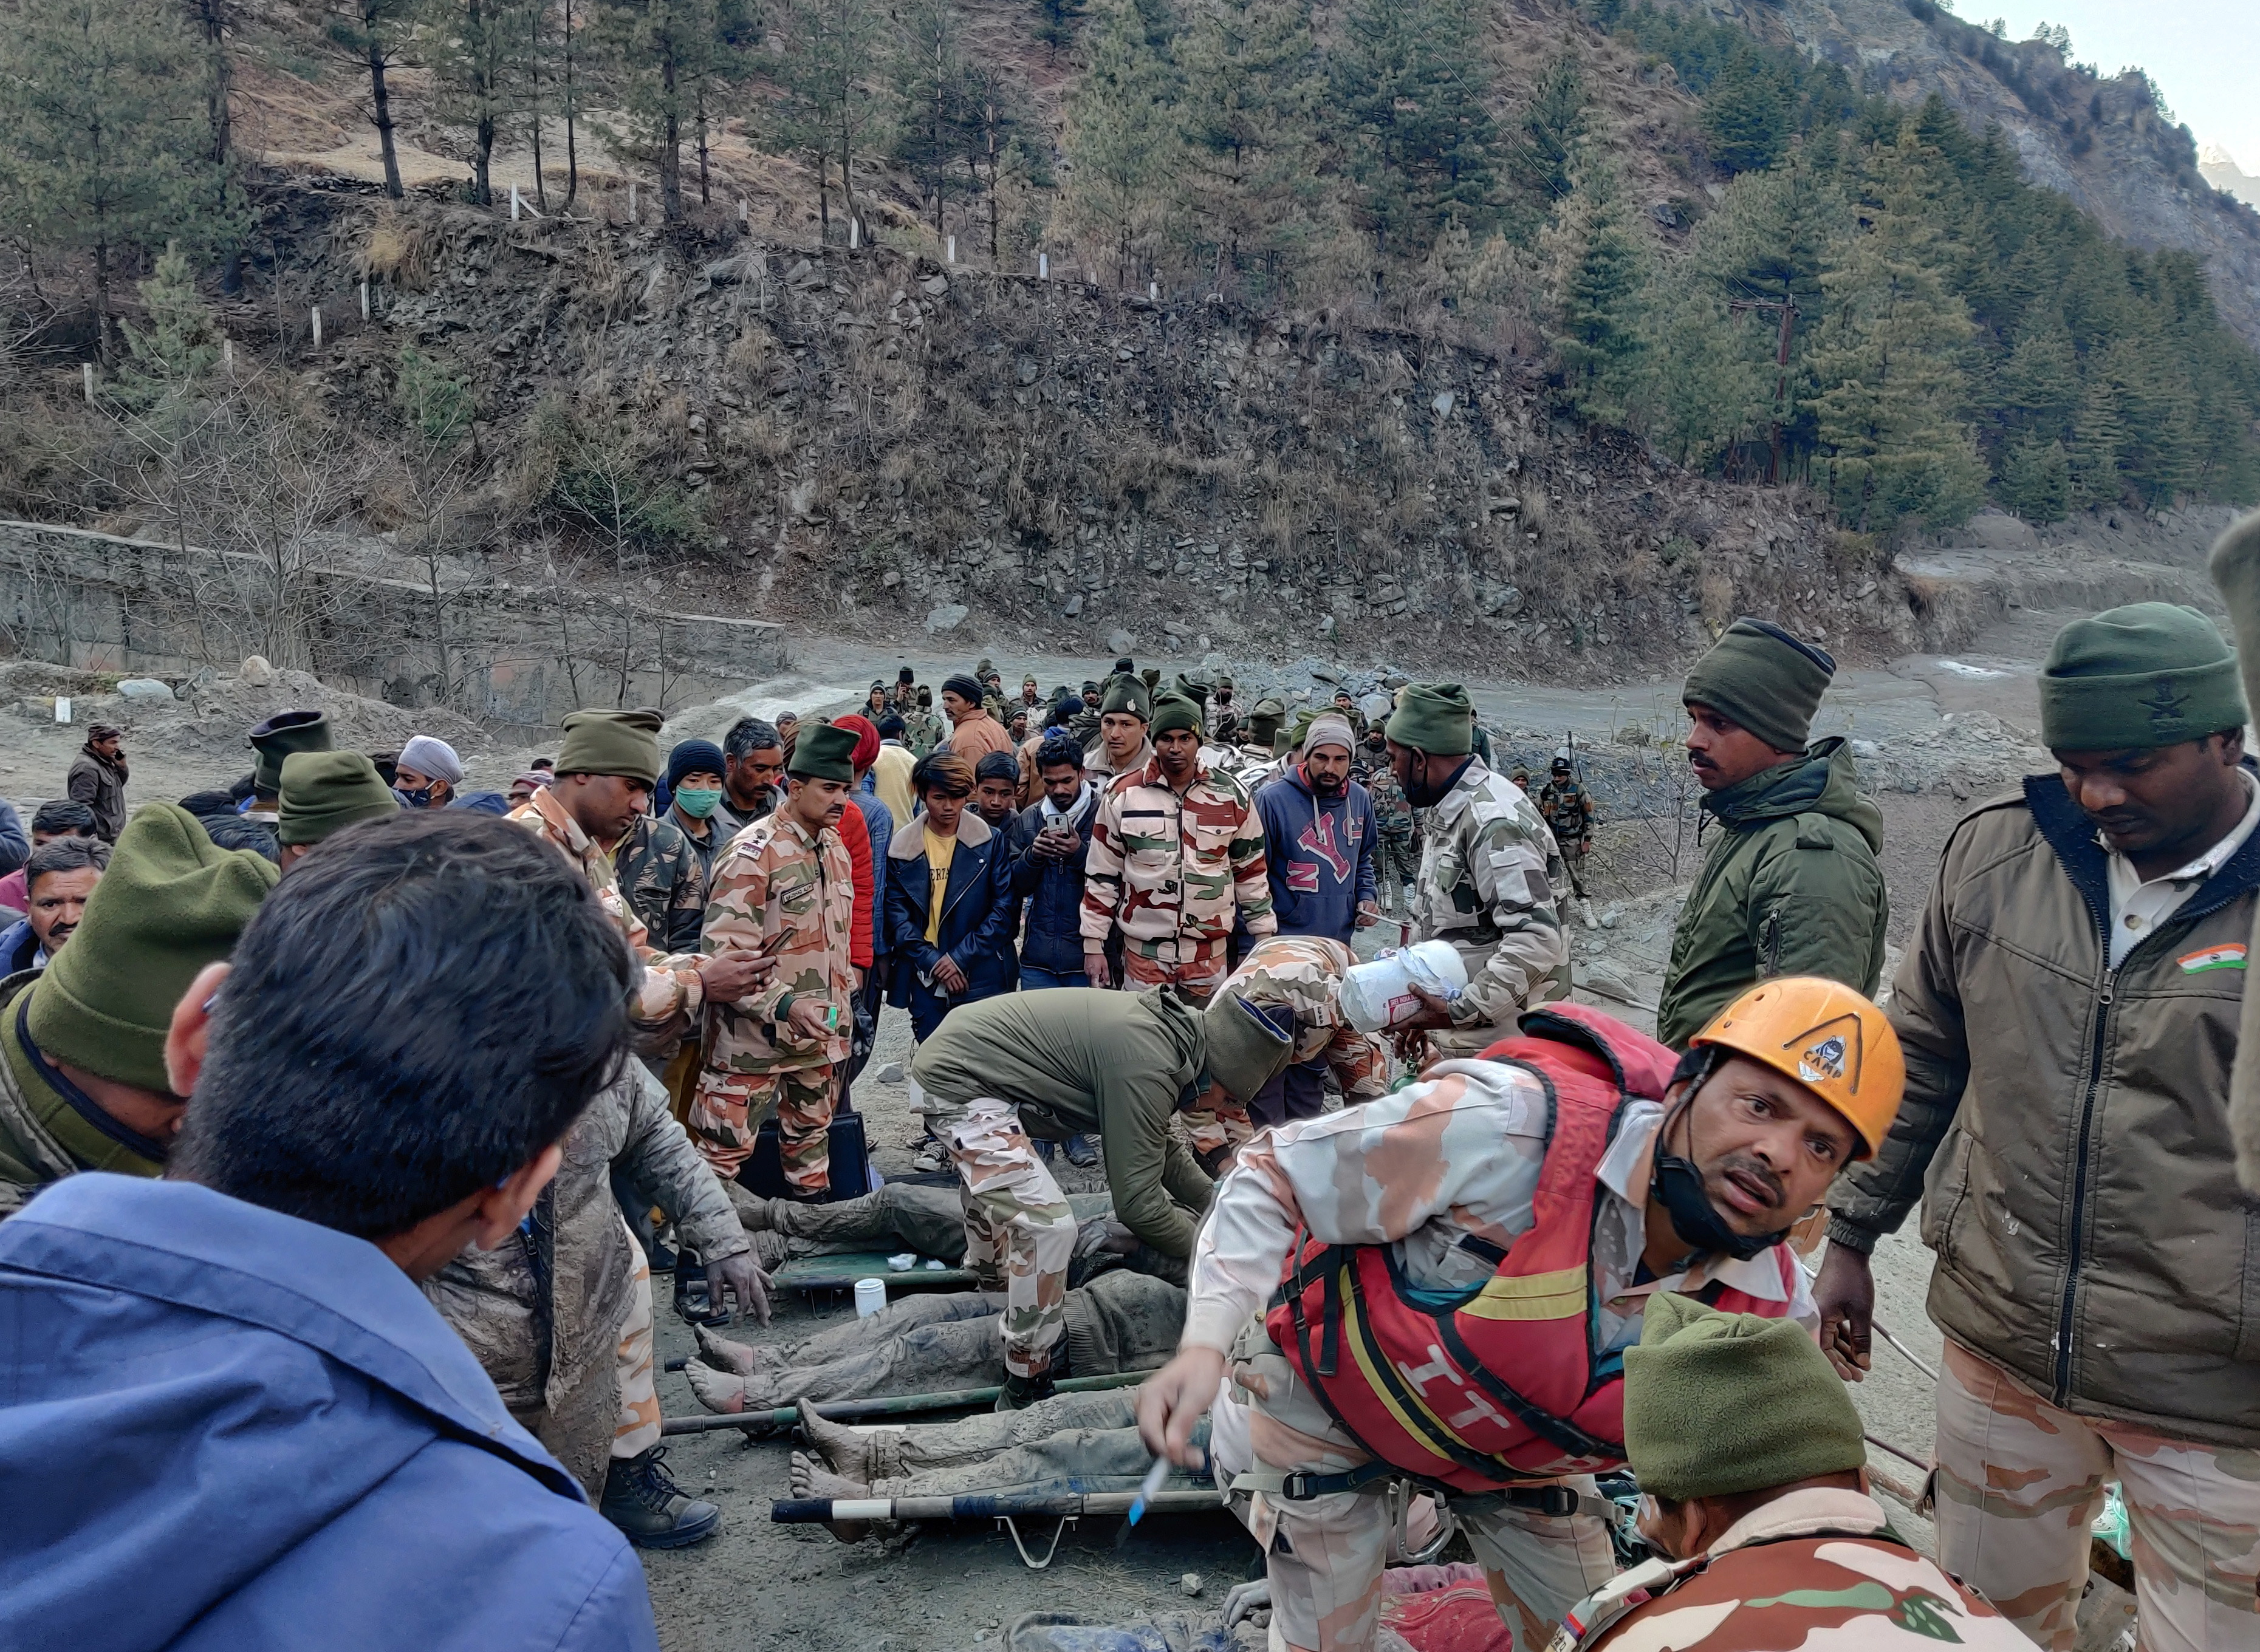 Members of Indo-Tibetan Border Police tend to people rescued after a Himalayan glacier broke and swept away a small hydroelectric dam, in Chormi